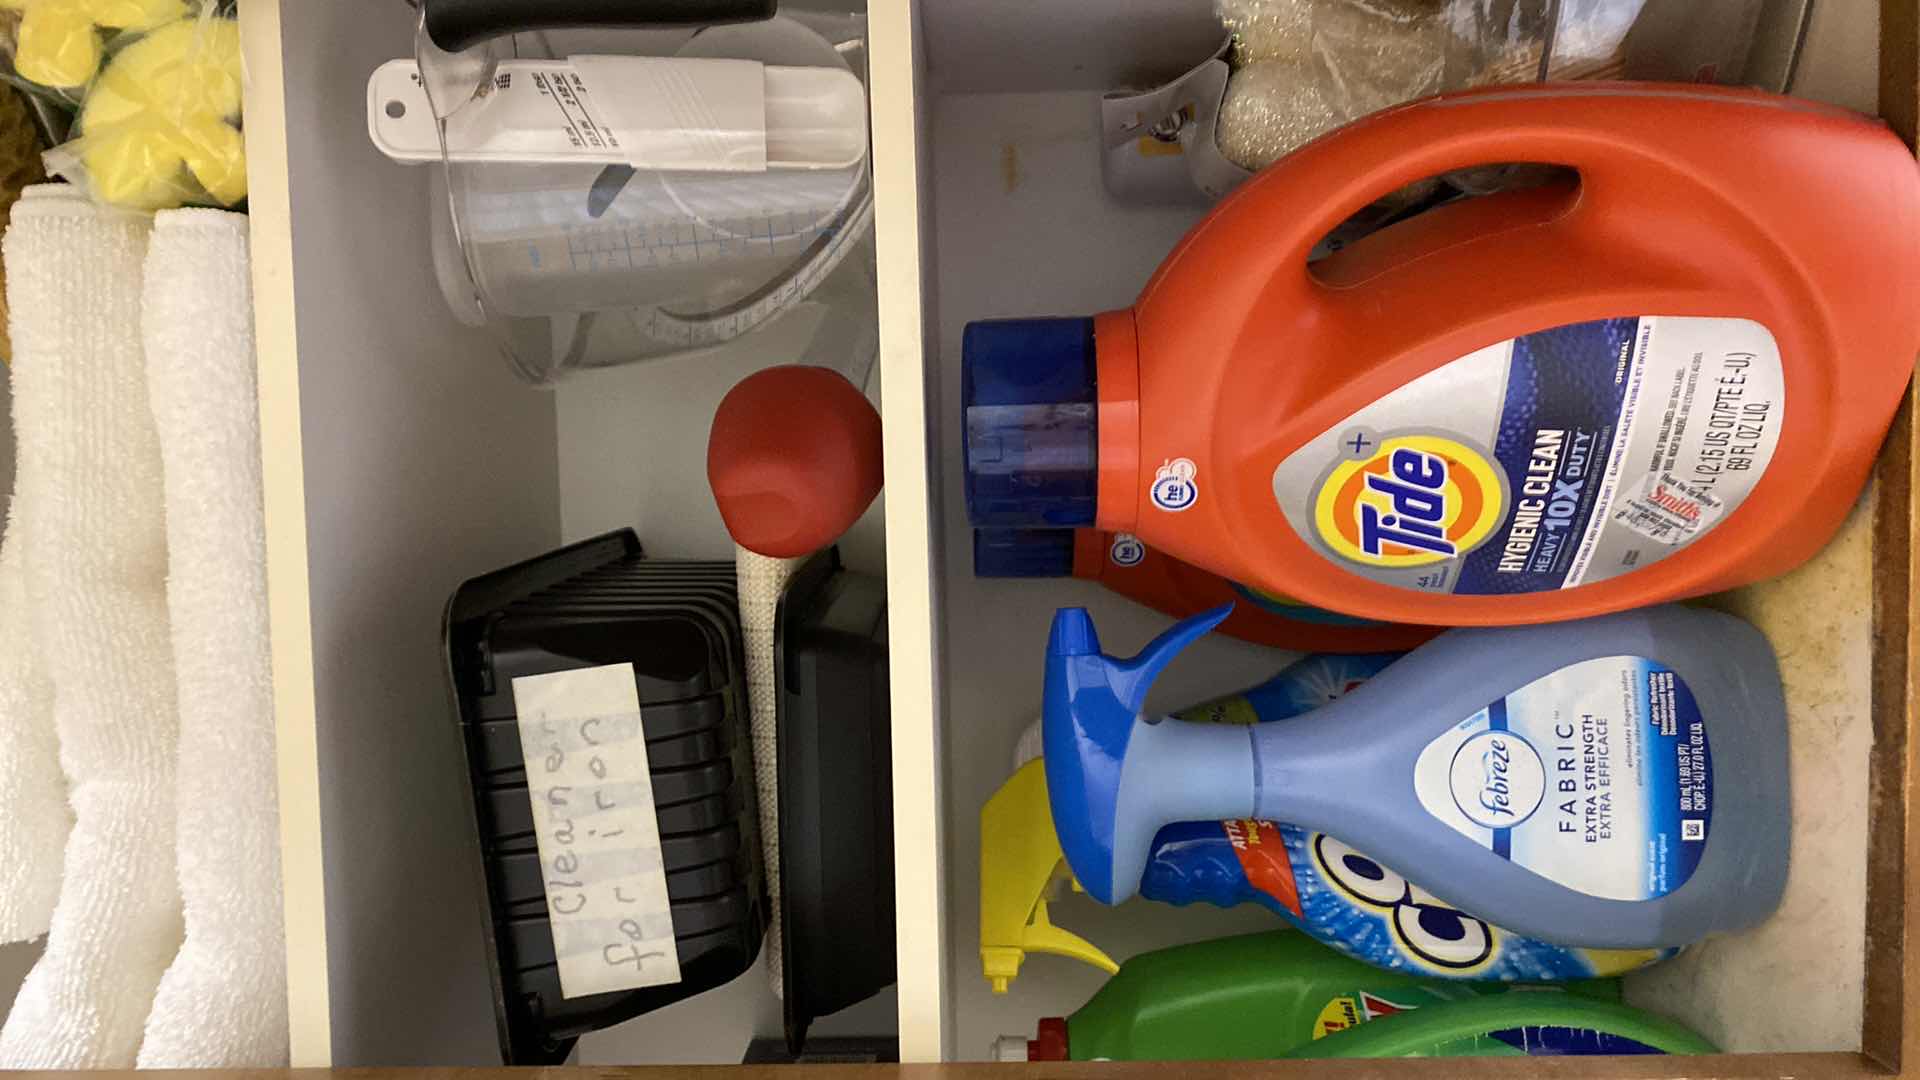 Photo 5 of CONTENTS OF CABINET LAUNDRY ROOM DETERGENT RAGS TRAVEL IRON AND MORE